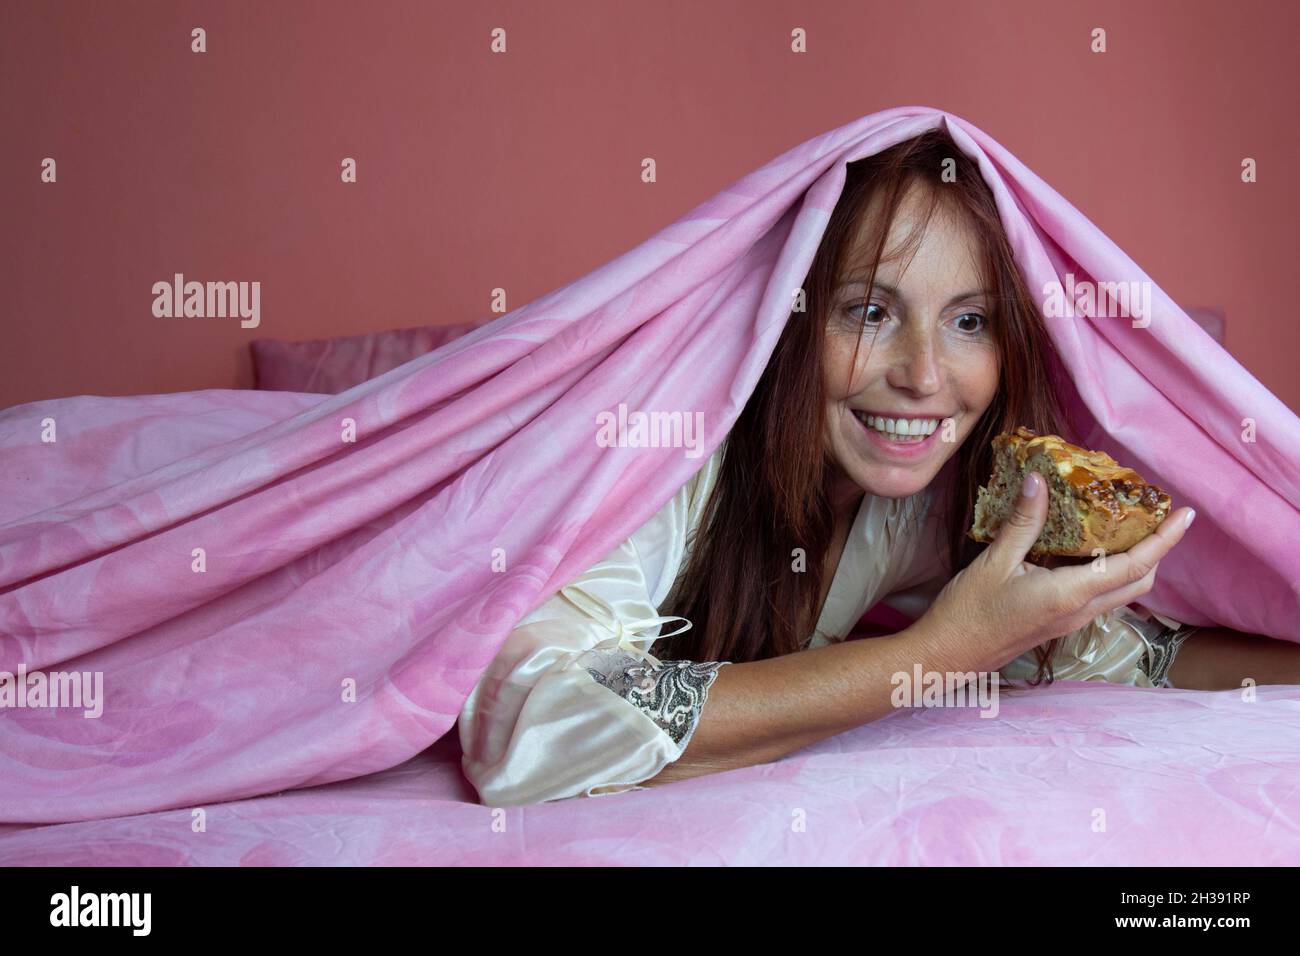 Night gluttony theme, woman on bed secretly eating a piece of pie Stock Photo